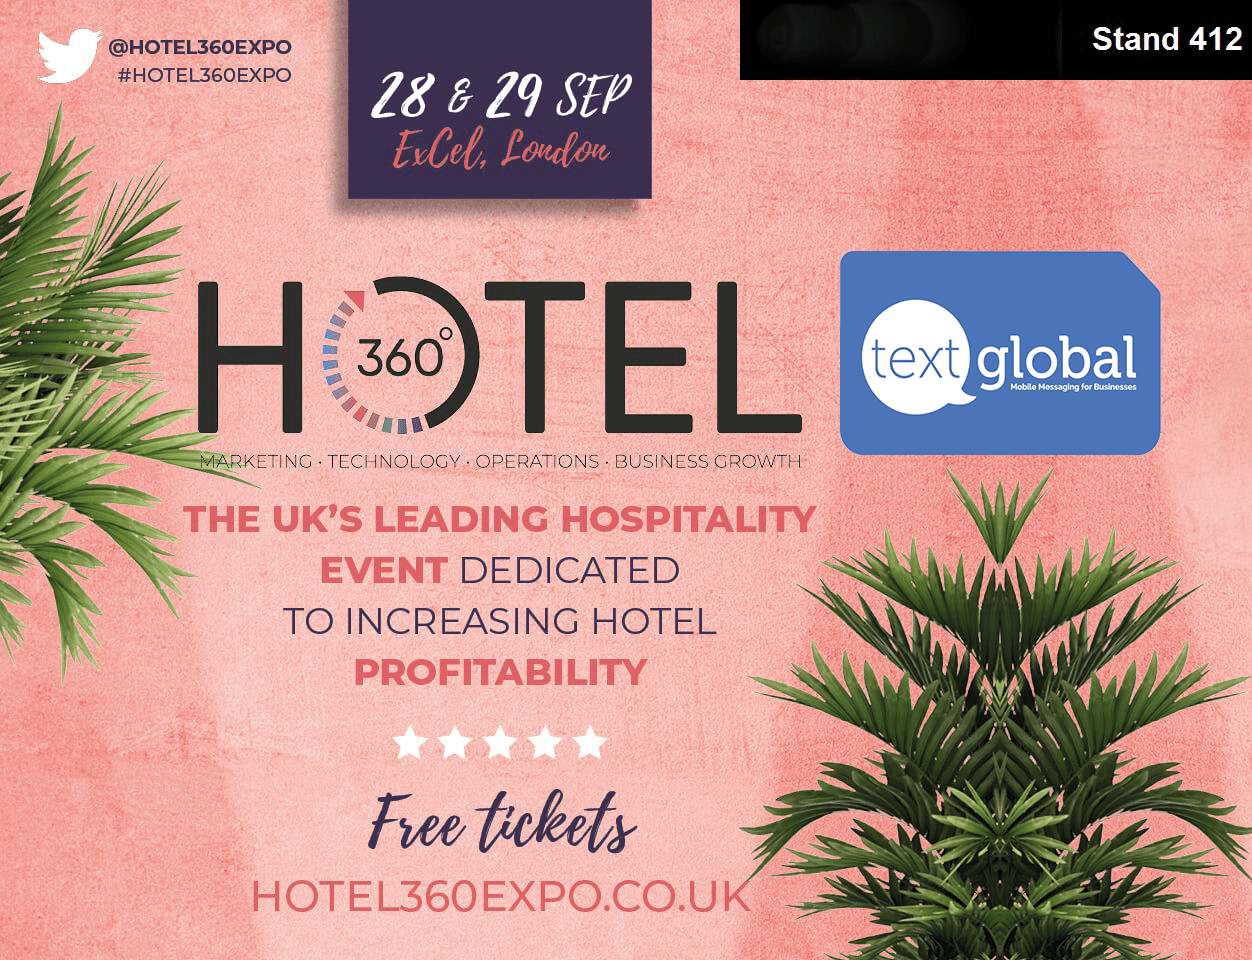 Text Global Hotel 360 Expo